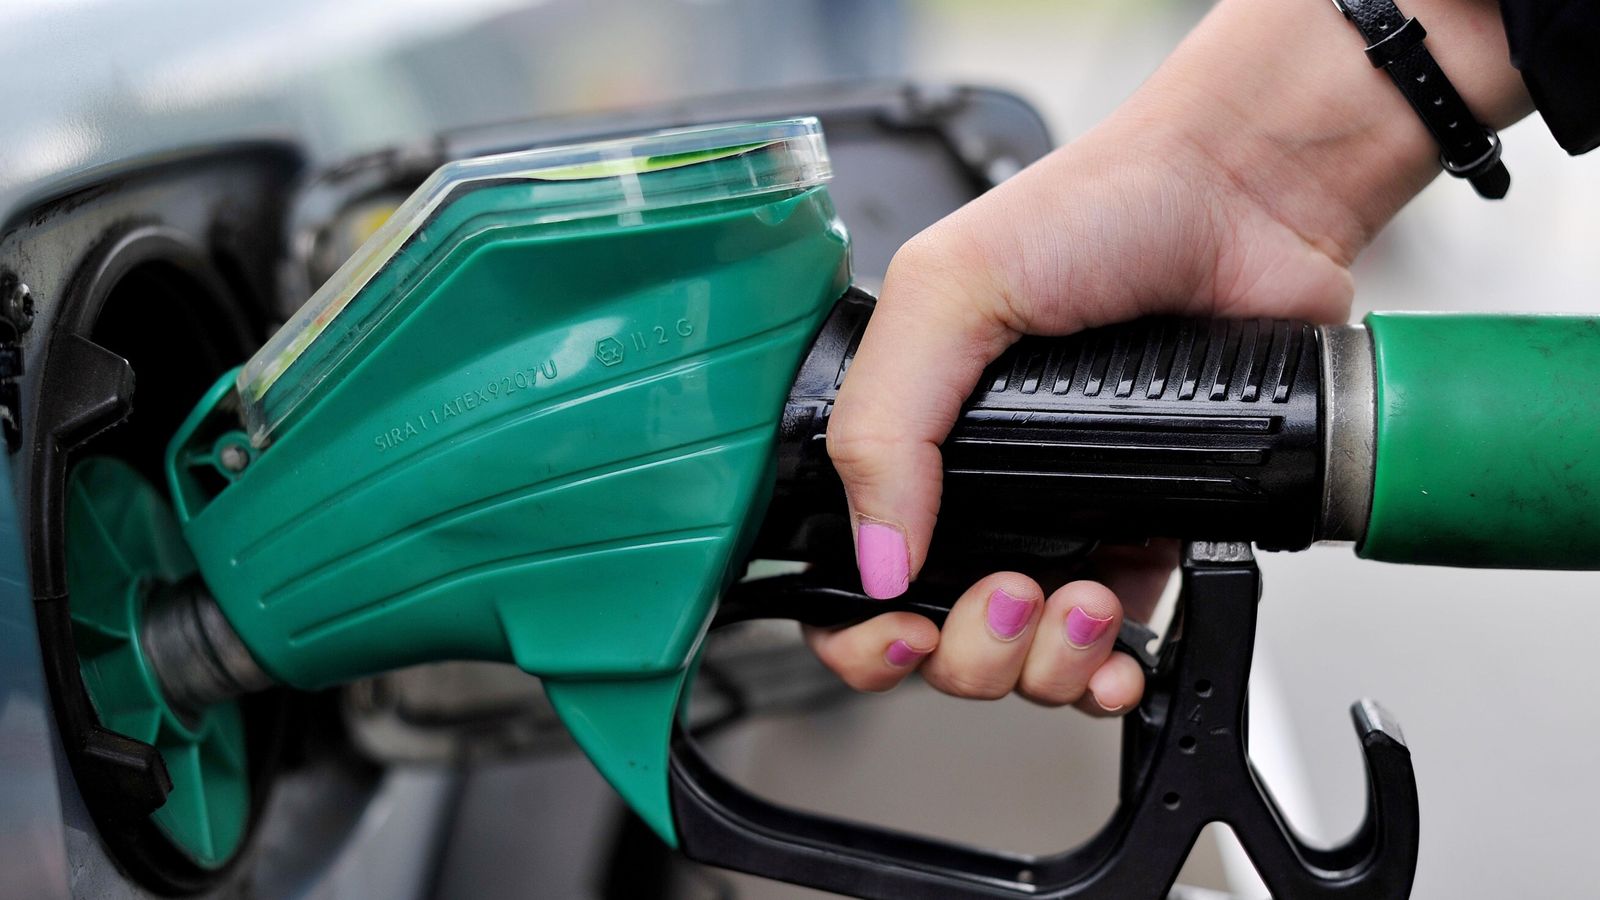 Campaigners call for 25p cut in fuel duty to reduce cost of living crisis